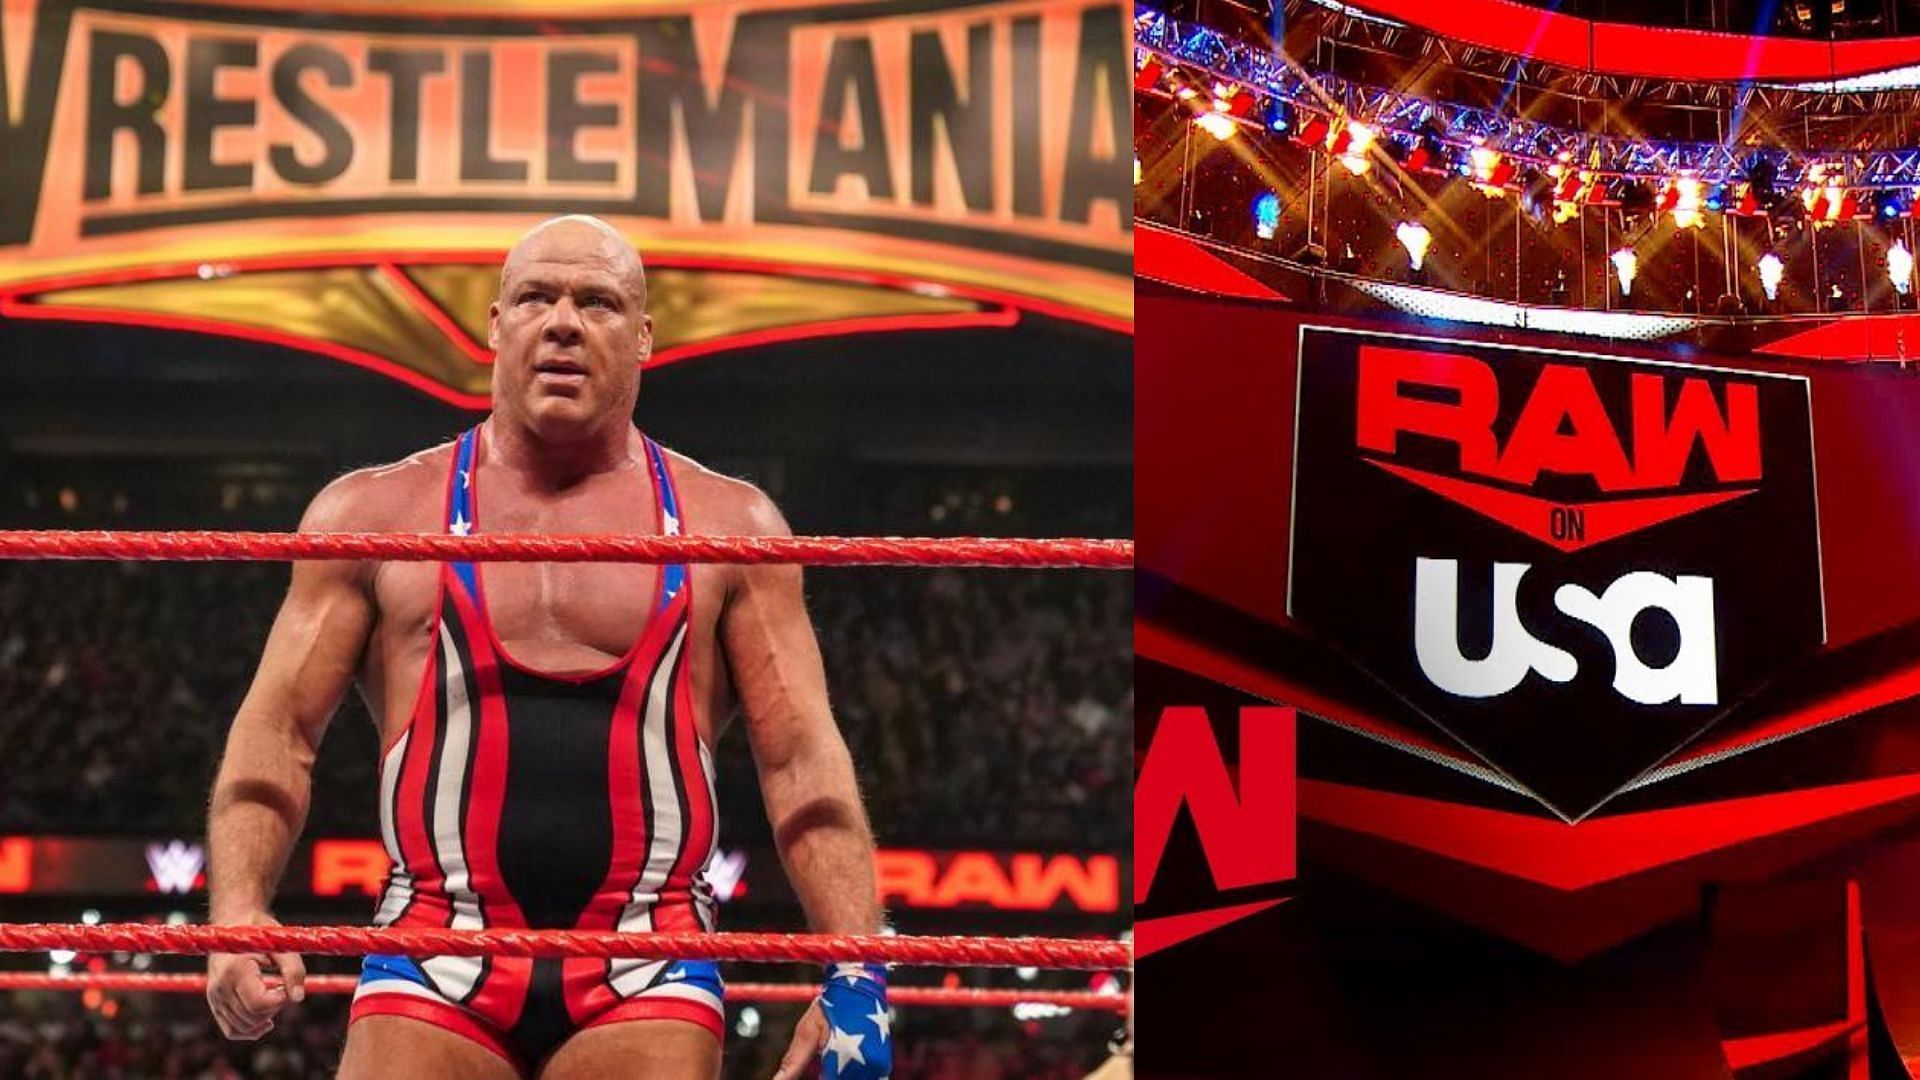 WWE Hall of Famer Kurt Angle has discussed a timeline for his upcoming return to RAW